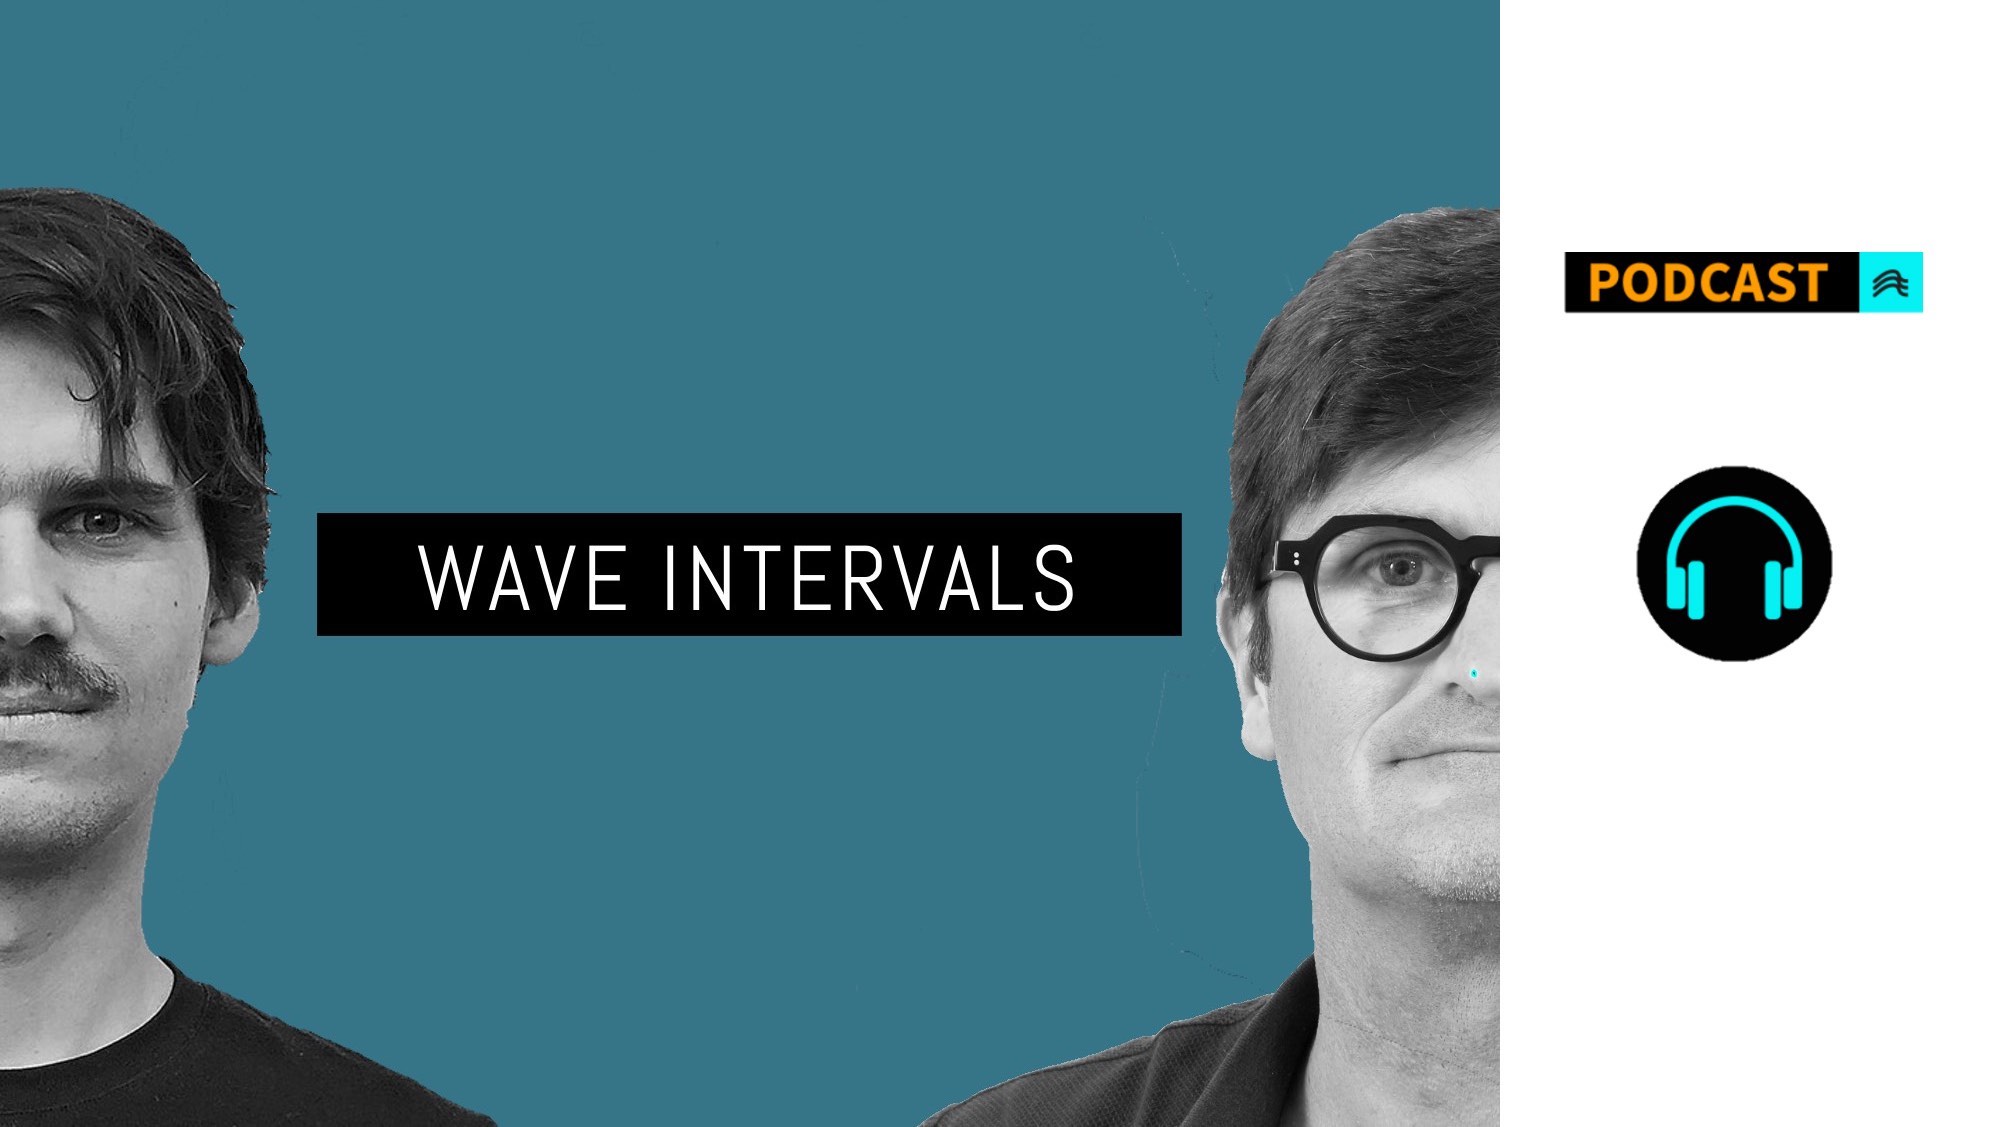 intervals in wave pools